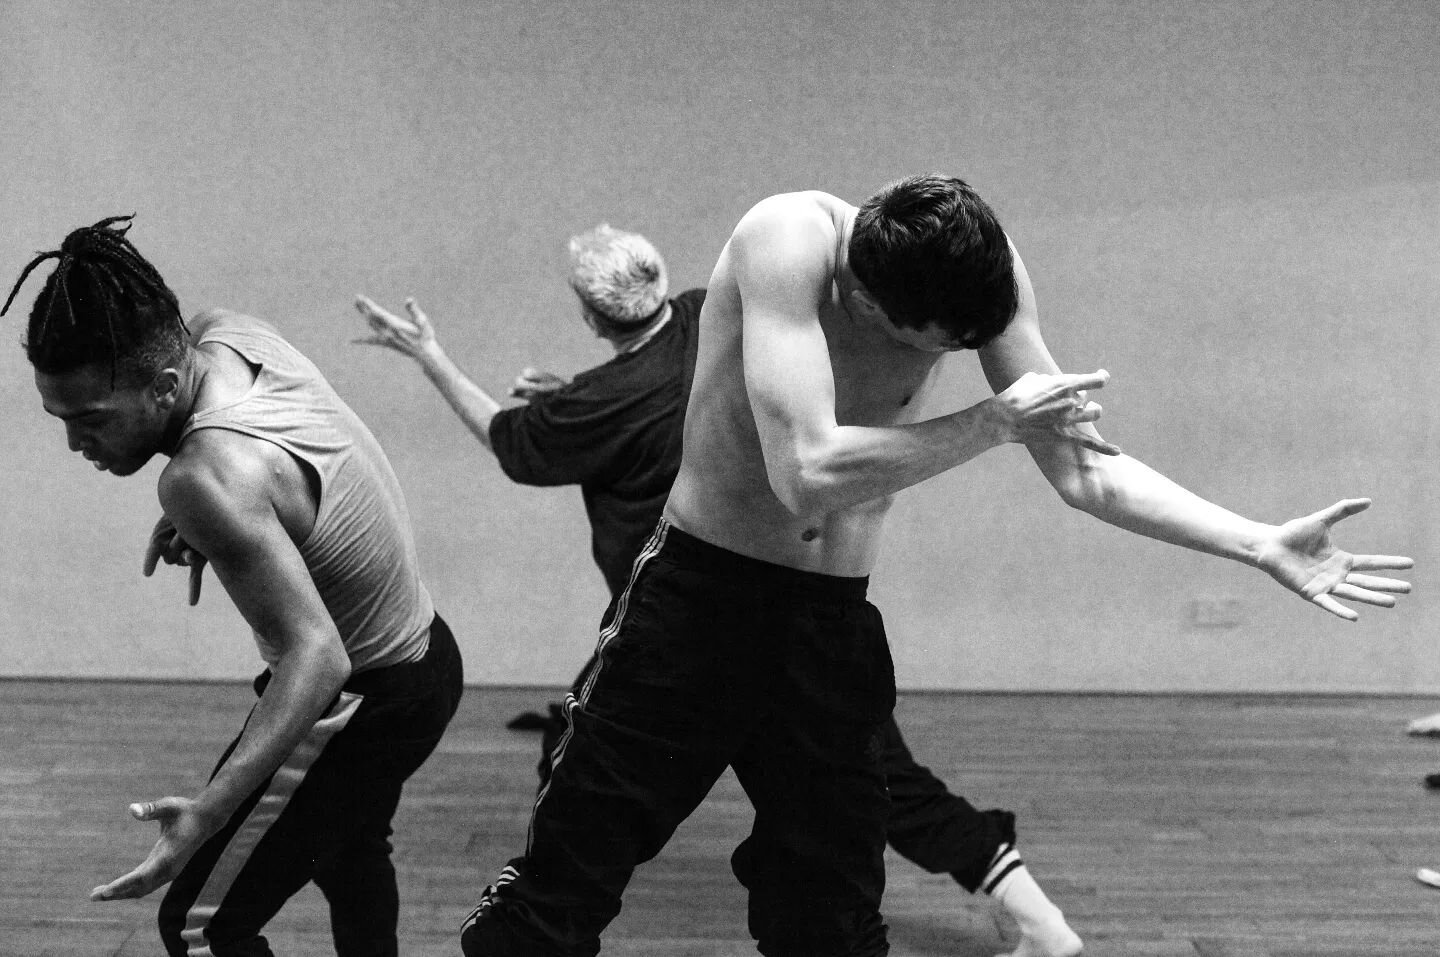 'An absorbing interrogation of the male gender' - Graham Watts (Dancing Times)

Image from rehearsals for @bhybriddance
theatre production 'Masc 4 Marginalisation'.

📸 - @noelshelly1
Choreo- @itsbriangillespie
Dancers - @just_dak_ @jamessydneyrobert